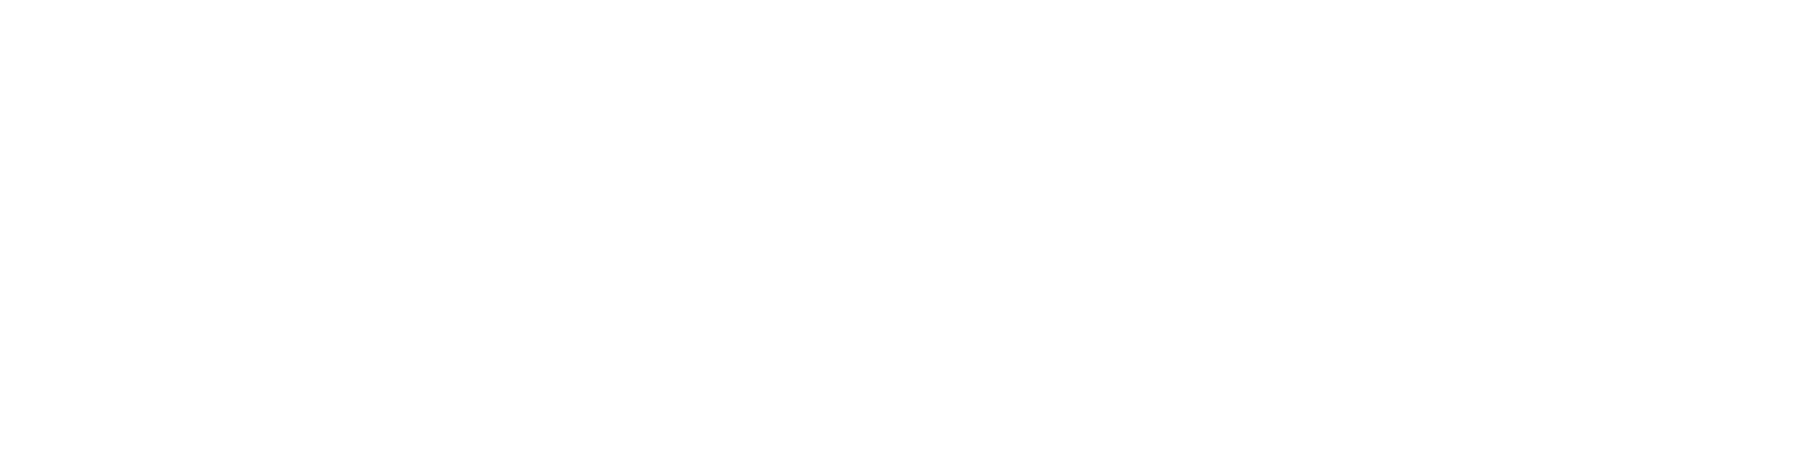 The Champagne & Gift Company logo